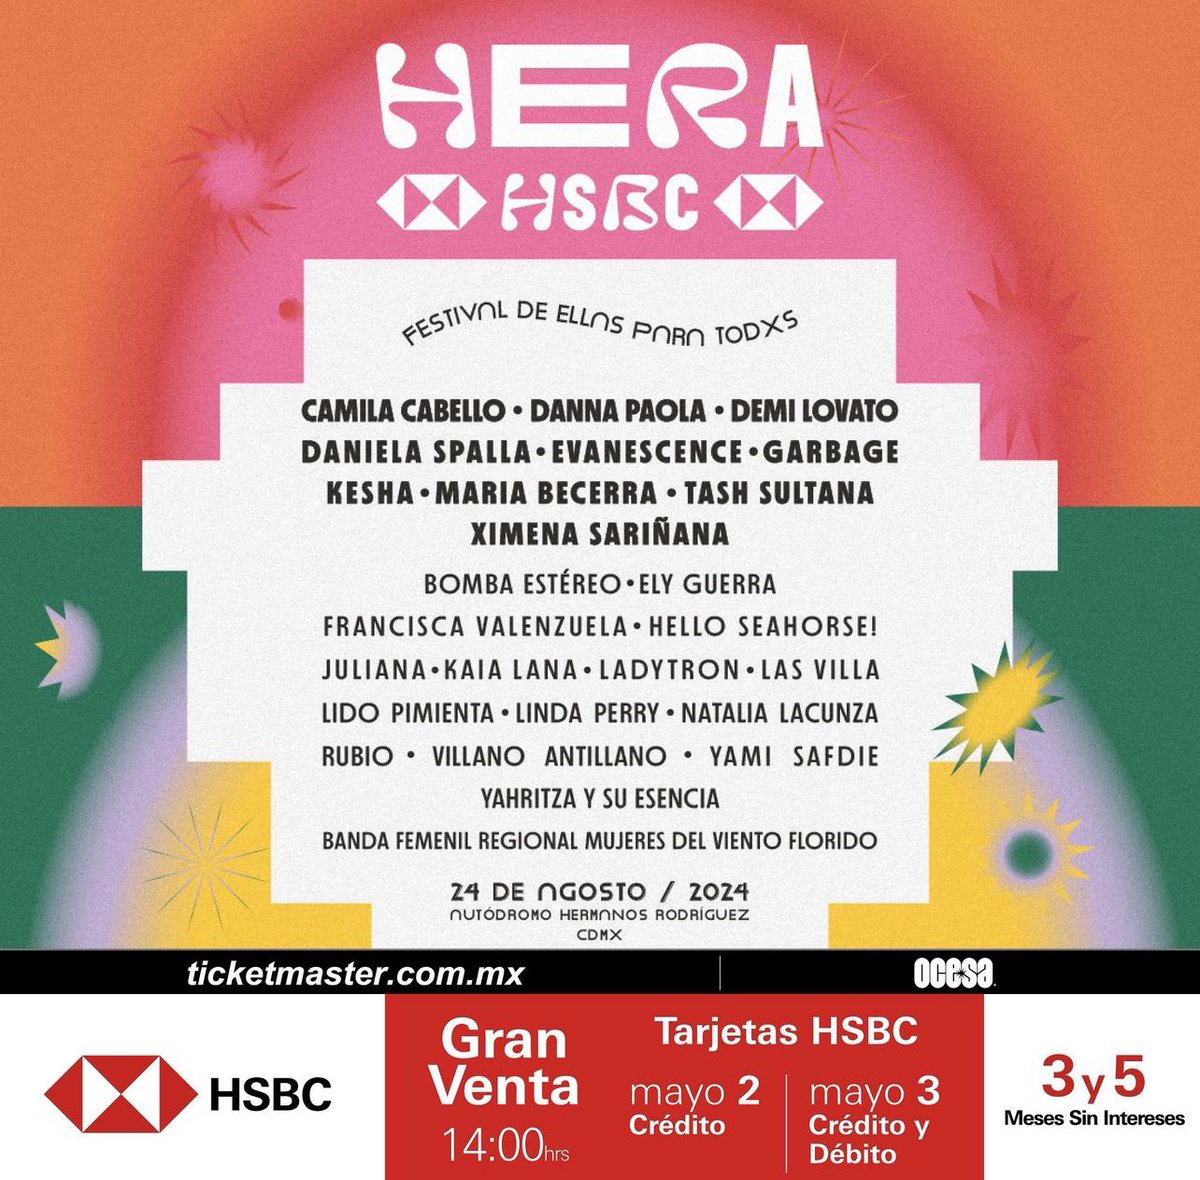 Camila Cabello will perform at the Hera HSBC Festival on August 24th, in Mexico!